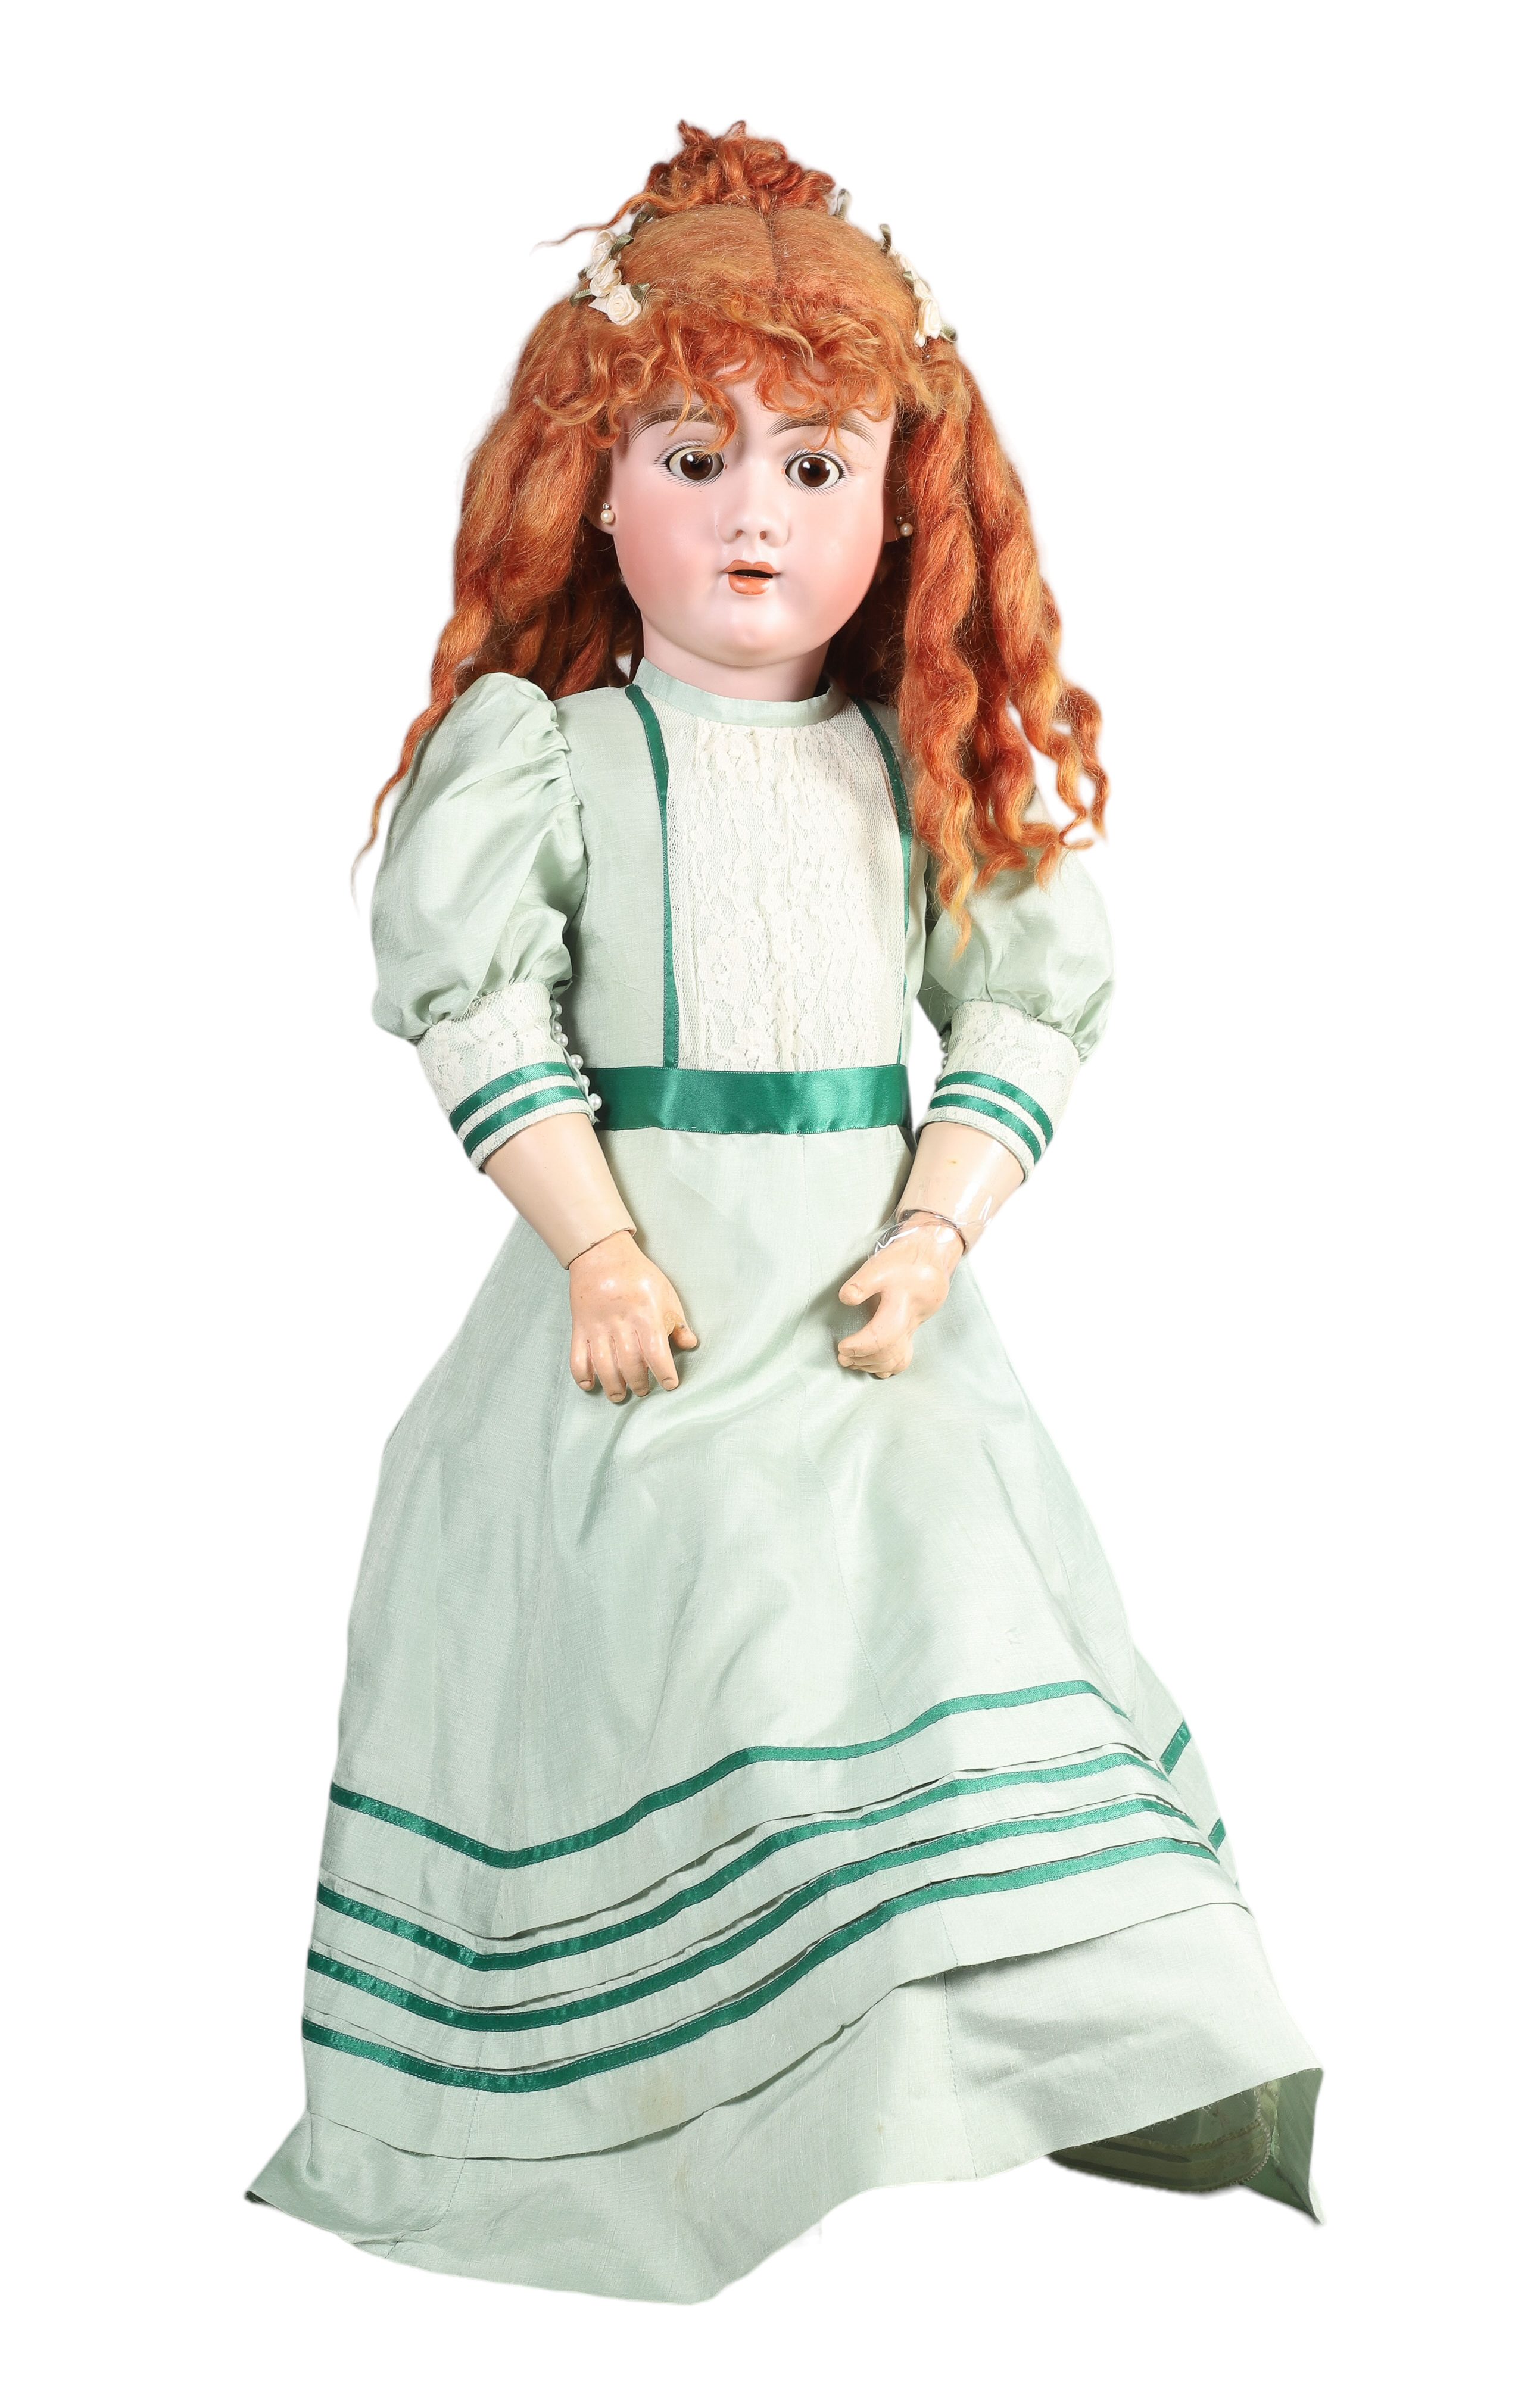 Large porcelain doll, open mouth, no